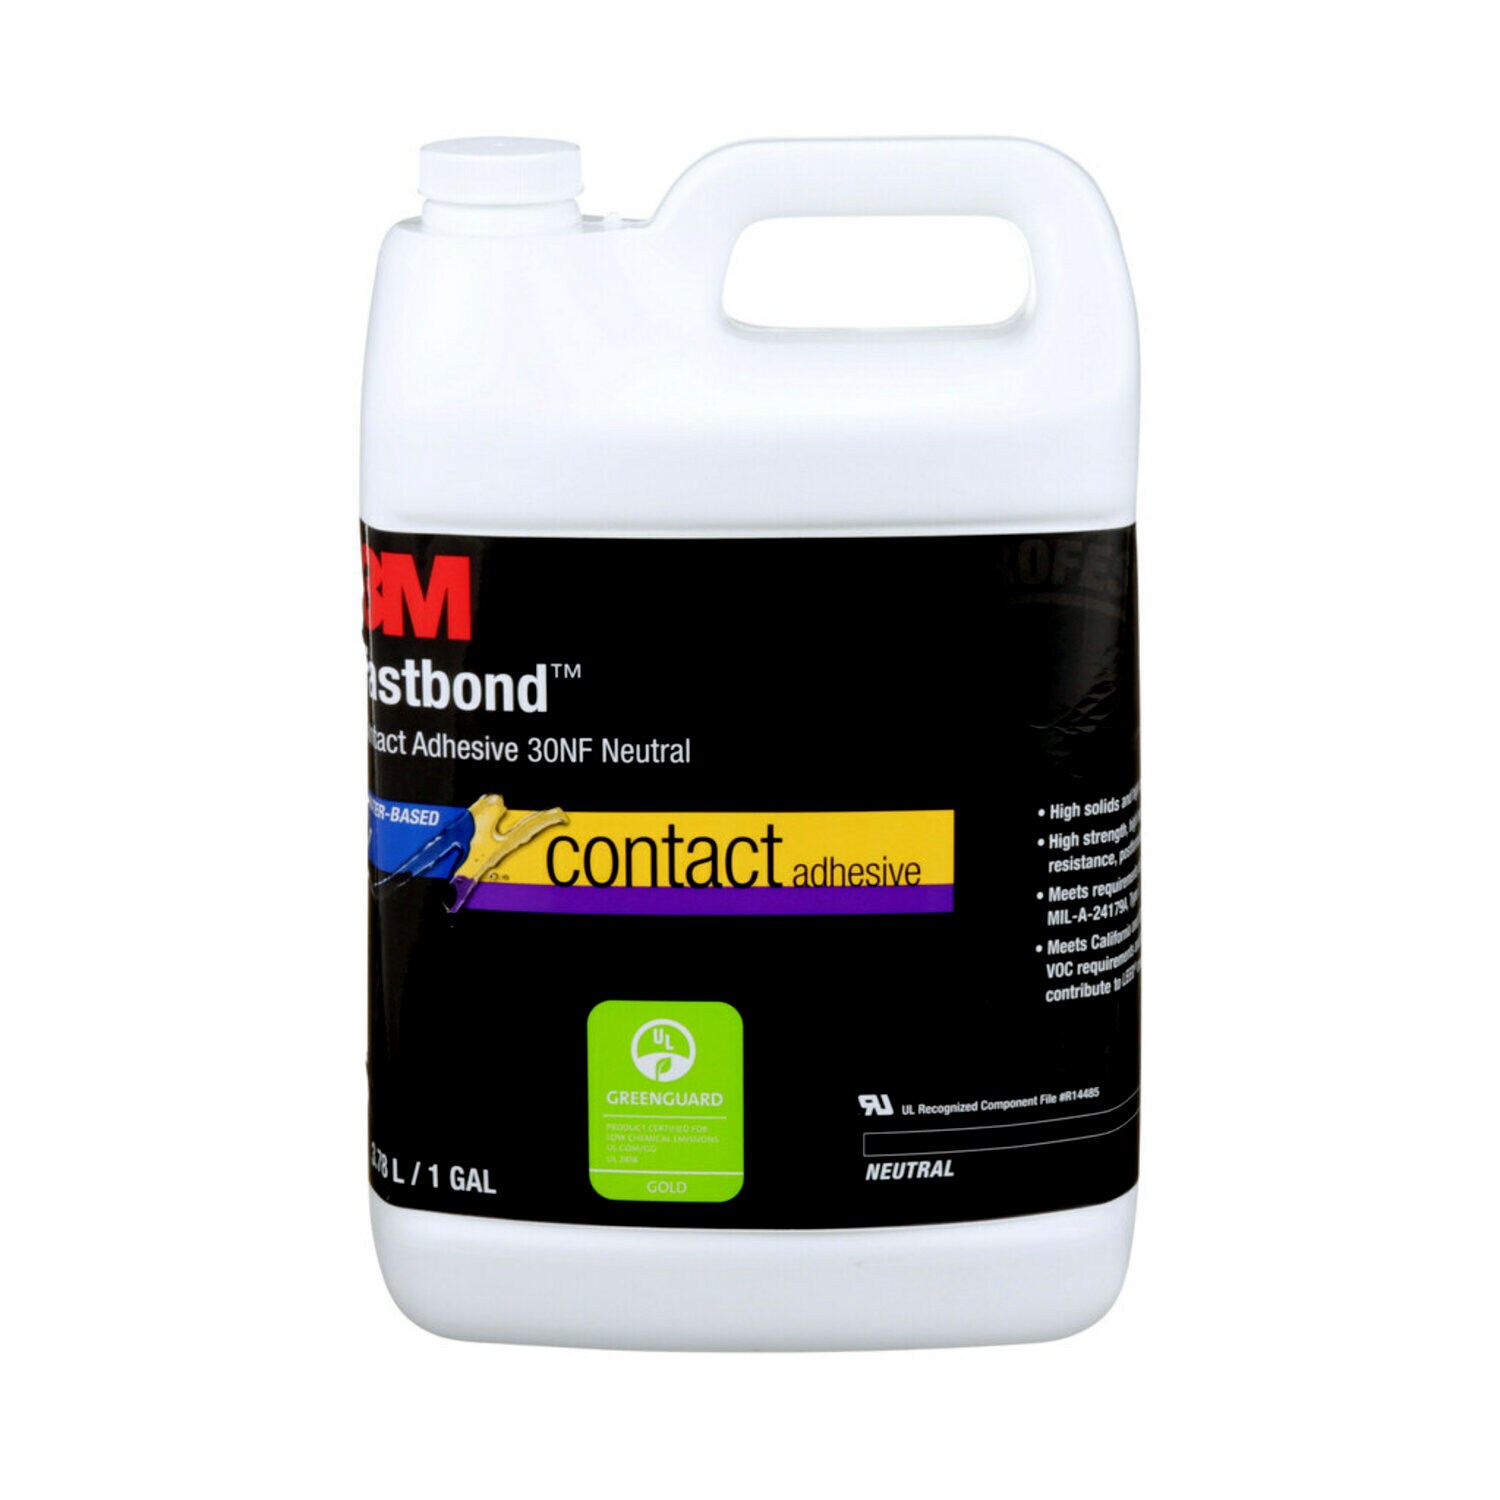 7000046568 - 3M Fastbond Contact Adhesive 30NF, Neutral, 1 Gallon Can, 4/case